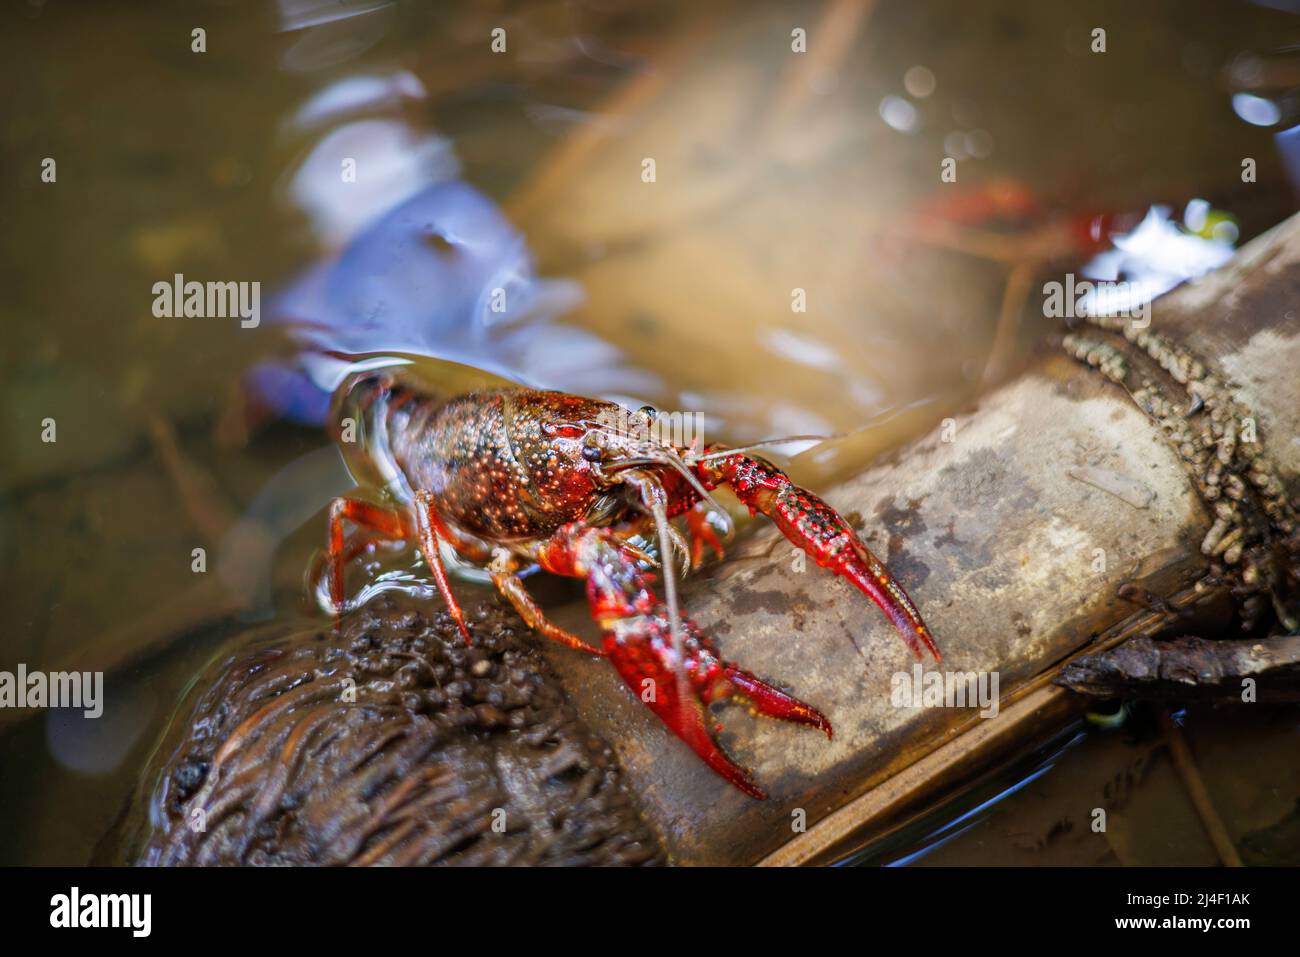 This red swamp crayfish, procambarus clarkii, was photographed at the edge of a fresh water stream on the island of Maui, Hawaii, where it is an invas Stock Photo